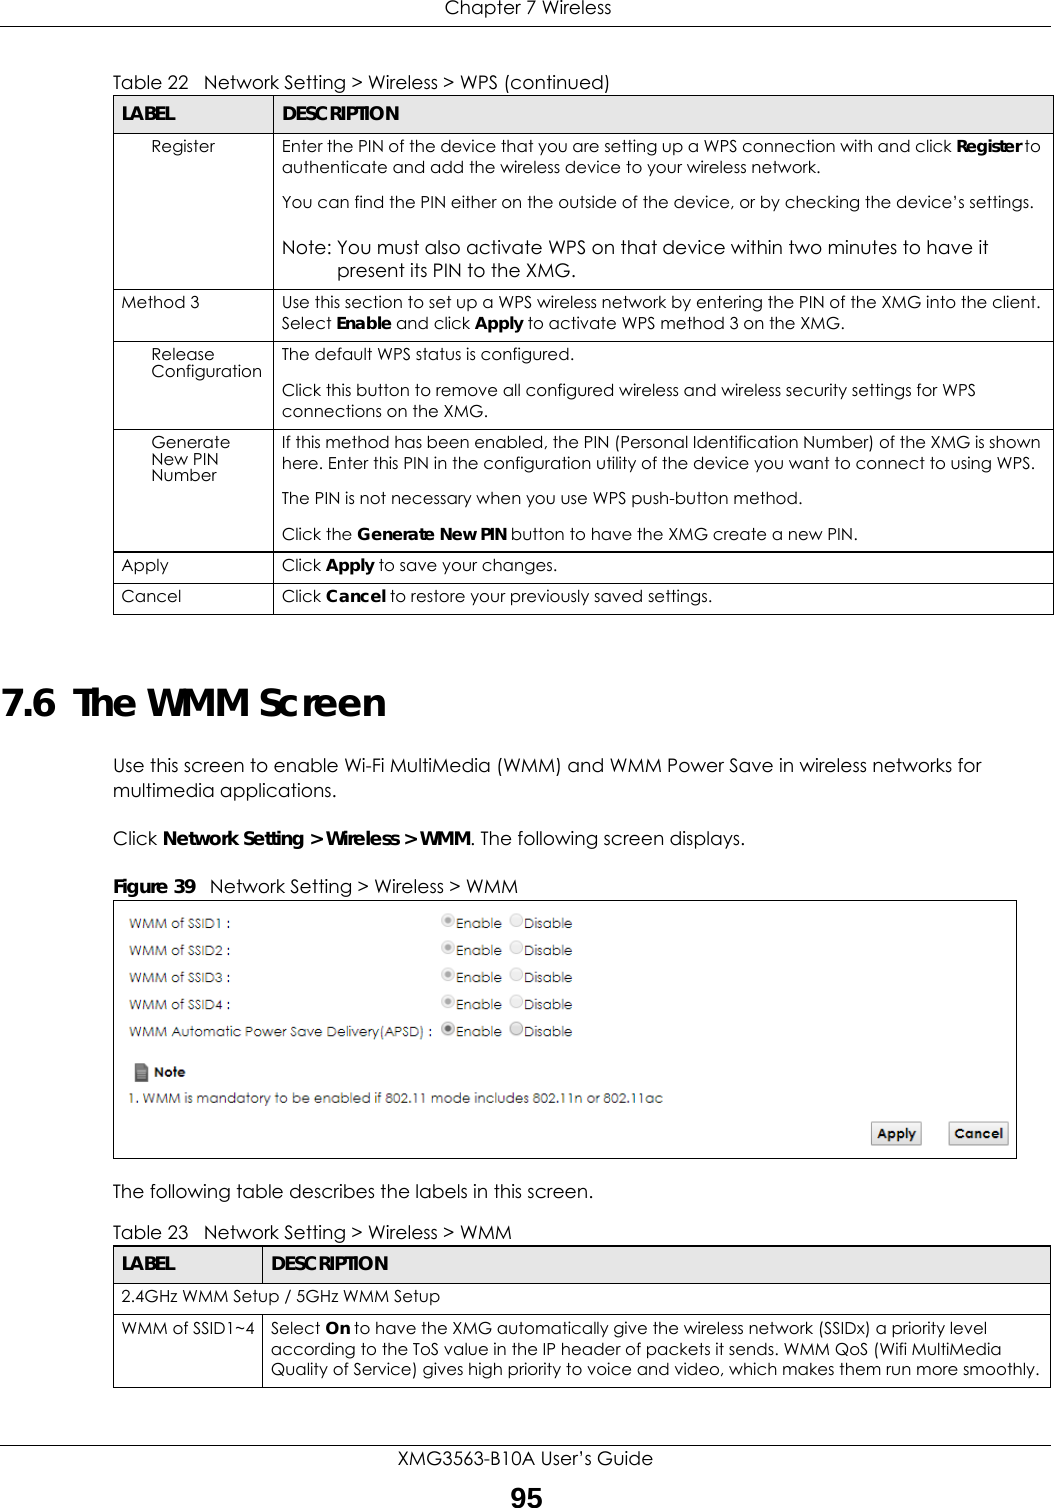  Chapter 7 WirelessXMG3563-B10A User’s Guide957.6  The WMM ScreenUse this screen to enable Wi-Fi MultiMedia (WMM) and WMM Power Save in wireless networks for multimedia applications.Click Network Setting &gt; Wireless &gt; WMM. The following screen displays.Figure 39   Network Setting &gt; Wireless &gt; WMMThe following table describes the labels in this screen.Register Enter the PIN of the device that you are setting up a WPS connection with and click Register to authenticate and add the wireless device to your wireless network.You can find the PIN either on the outside of the device, or by checking the device’s settings.Note: You must also activate WPS on that device within two minutes to have it present its PIN to the XMG.Method 3 Use this section to set up a WPS wireless network by entering the PIN of the XMG into the client. Select Enable and click Apply to activate WPS method 3 on the XMG.Release Configuration The default WPS status is configured.Click this button to remove all configured wireless and wireless security settings for WPS connections on the XMG.Generate New PIN NumberIf this method has been enabled, the PIN (Personal Identification Number) of the XMG is shown here. Enter this PIN in the configuration utility of the device you want to connect to using WPS.The PIN is not necessary when you use WPS push-button method.Click the Generate New PIN button to have the XMG create a new PIN. Apply Click Apply to save your changes.Cancel Click Cancel to restore your previously saved settings.Table 22   Network Setting &gt; Wireless &gt; WPS (continued)LABEL DESCRIPTIONTable 23   Network Setting &gt; Wireless &gt; WMMLABEL DESCRIPTION2.4GHz WMM Setup / 5GHz WMM SetupWMM of SSID1~4 Select On to have the XMG automatically give the wireless network (SSIDx) a priority level according to the ToS value in the IP header of packets it sends. WMM QoS (Wifi MultiMedia Quality of Service) gives high priority to voice and video, which makes them run more smoothly.